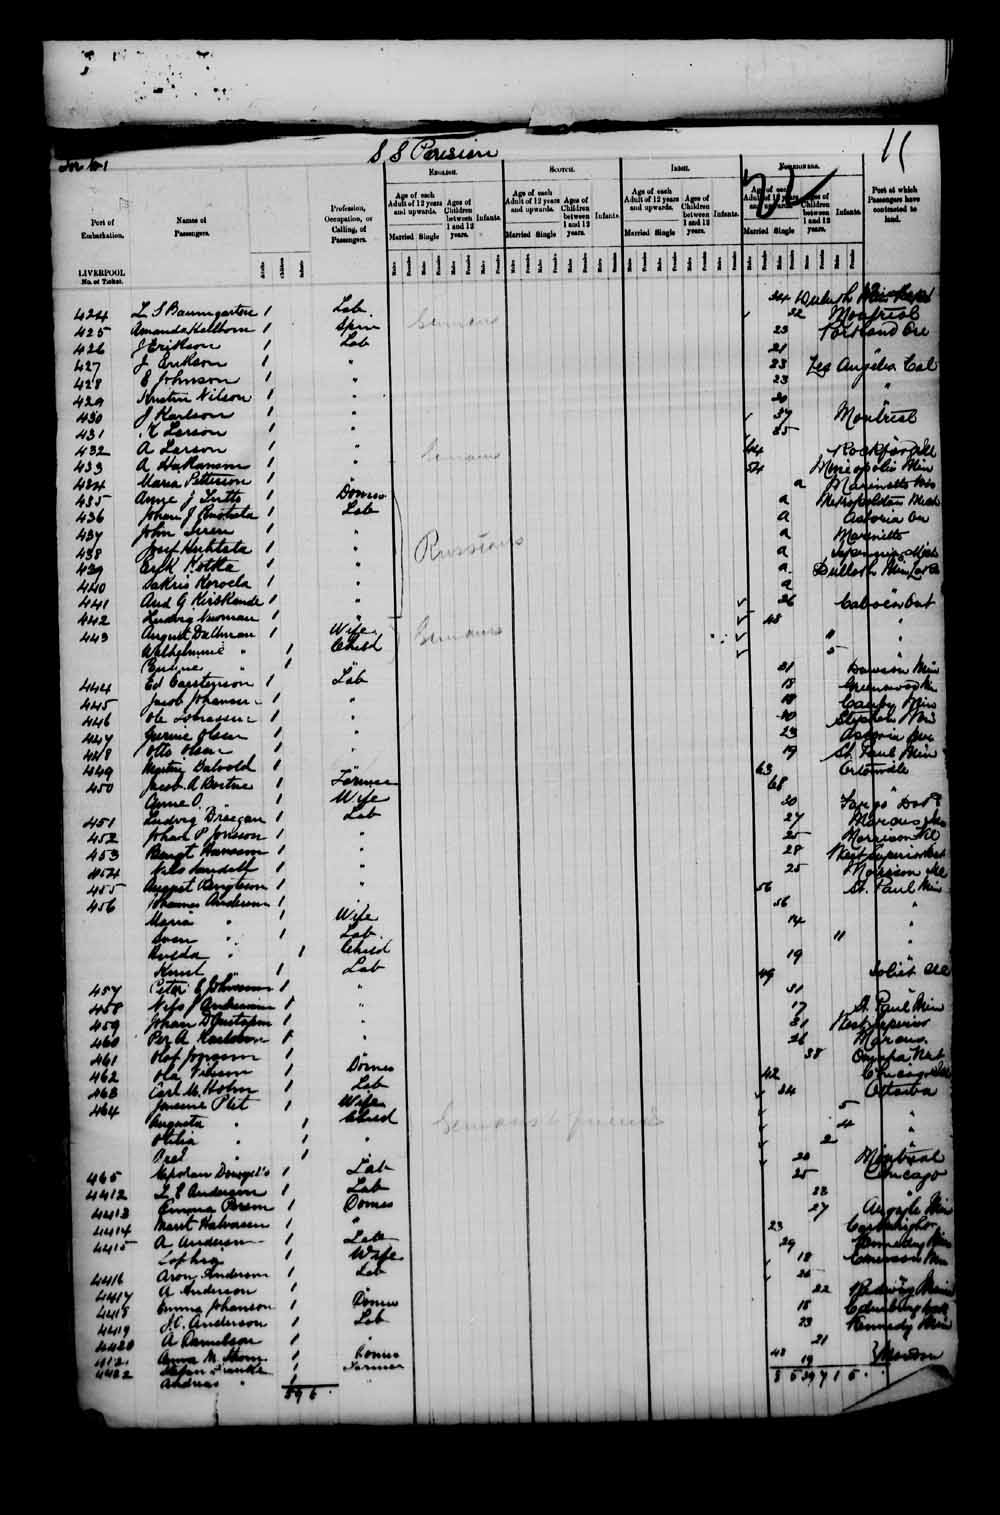 Digitized page of Passenger Lists for Image No.: e003549670